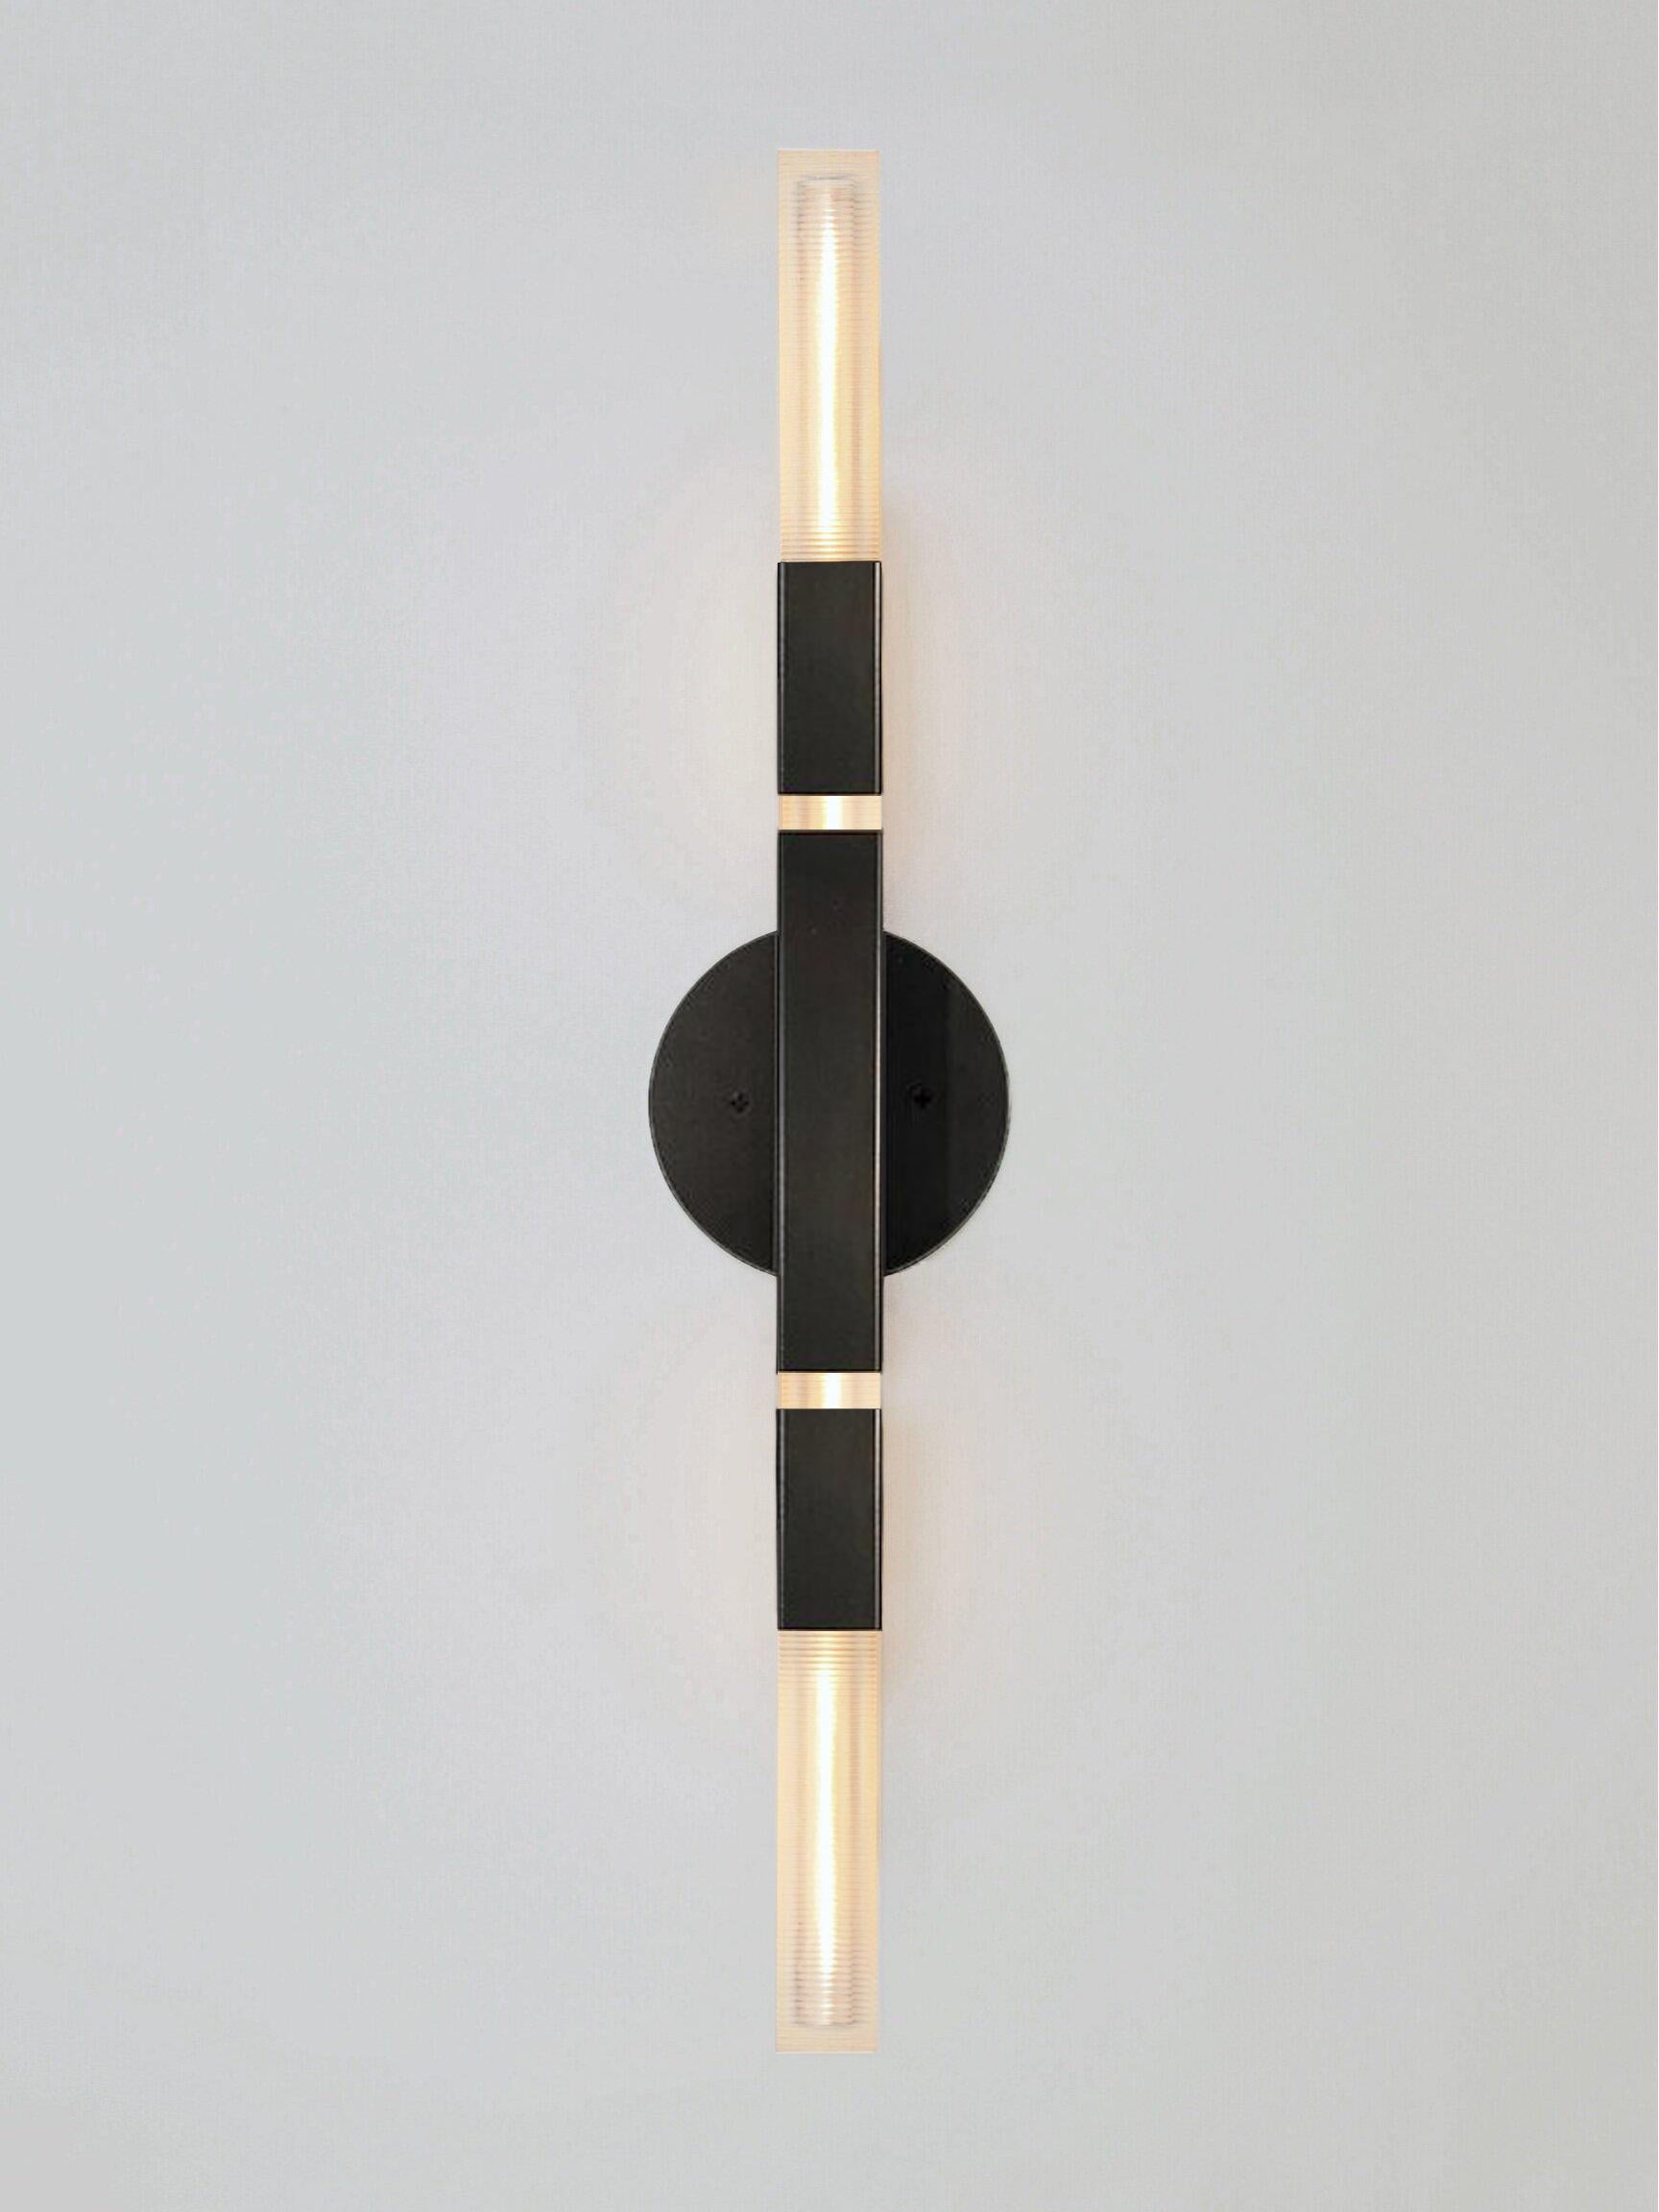 Daikon Studio  POST  Banded Duo Sconce 

The Banded Duo Sconce celebrates the poetic dialogue between light and form to create a fixture that leans into the timeless and iconic. Meticulously crafted by hand in our studios. Horizontal or vertical